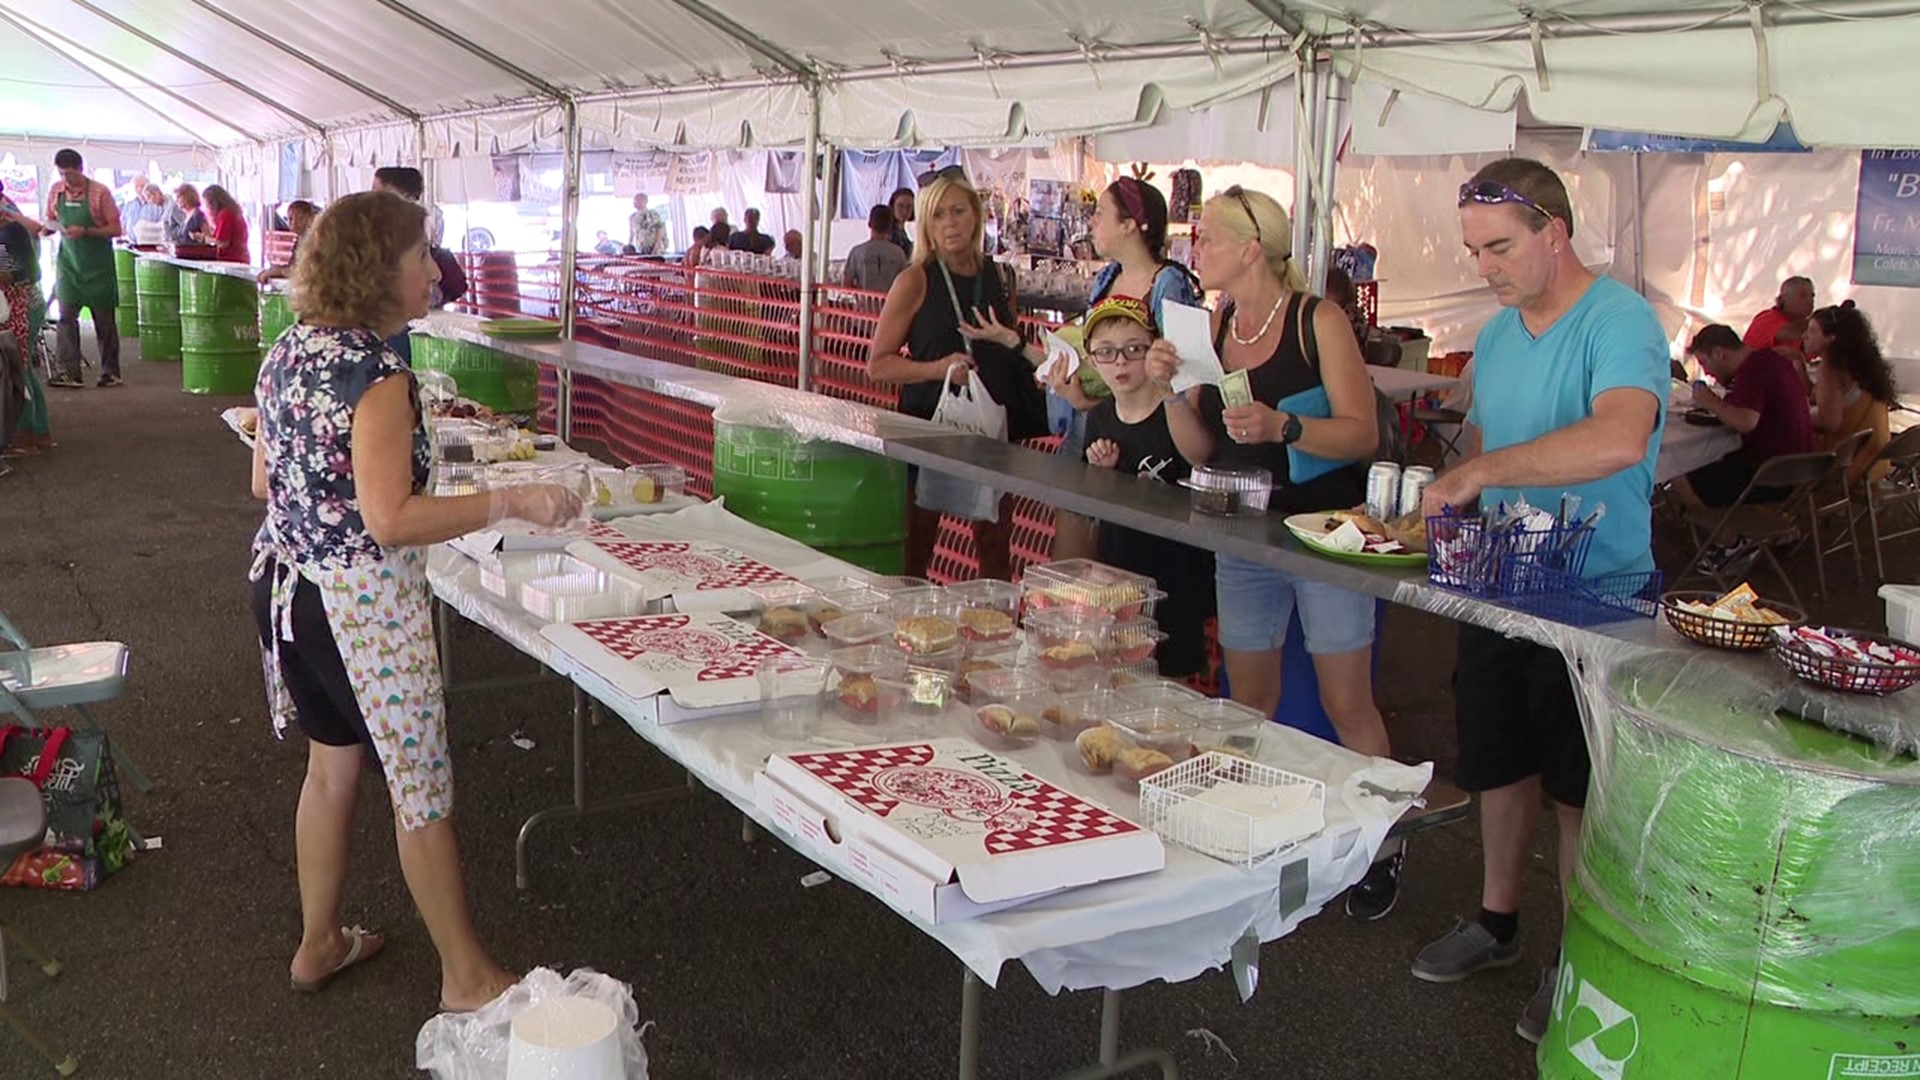 A church in scranton hosted its annual Lebanese American Food Festival this weekend.